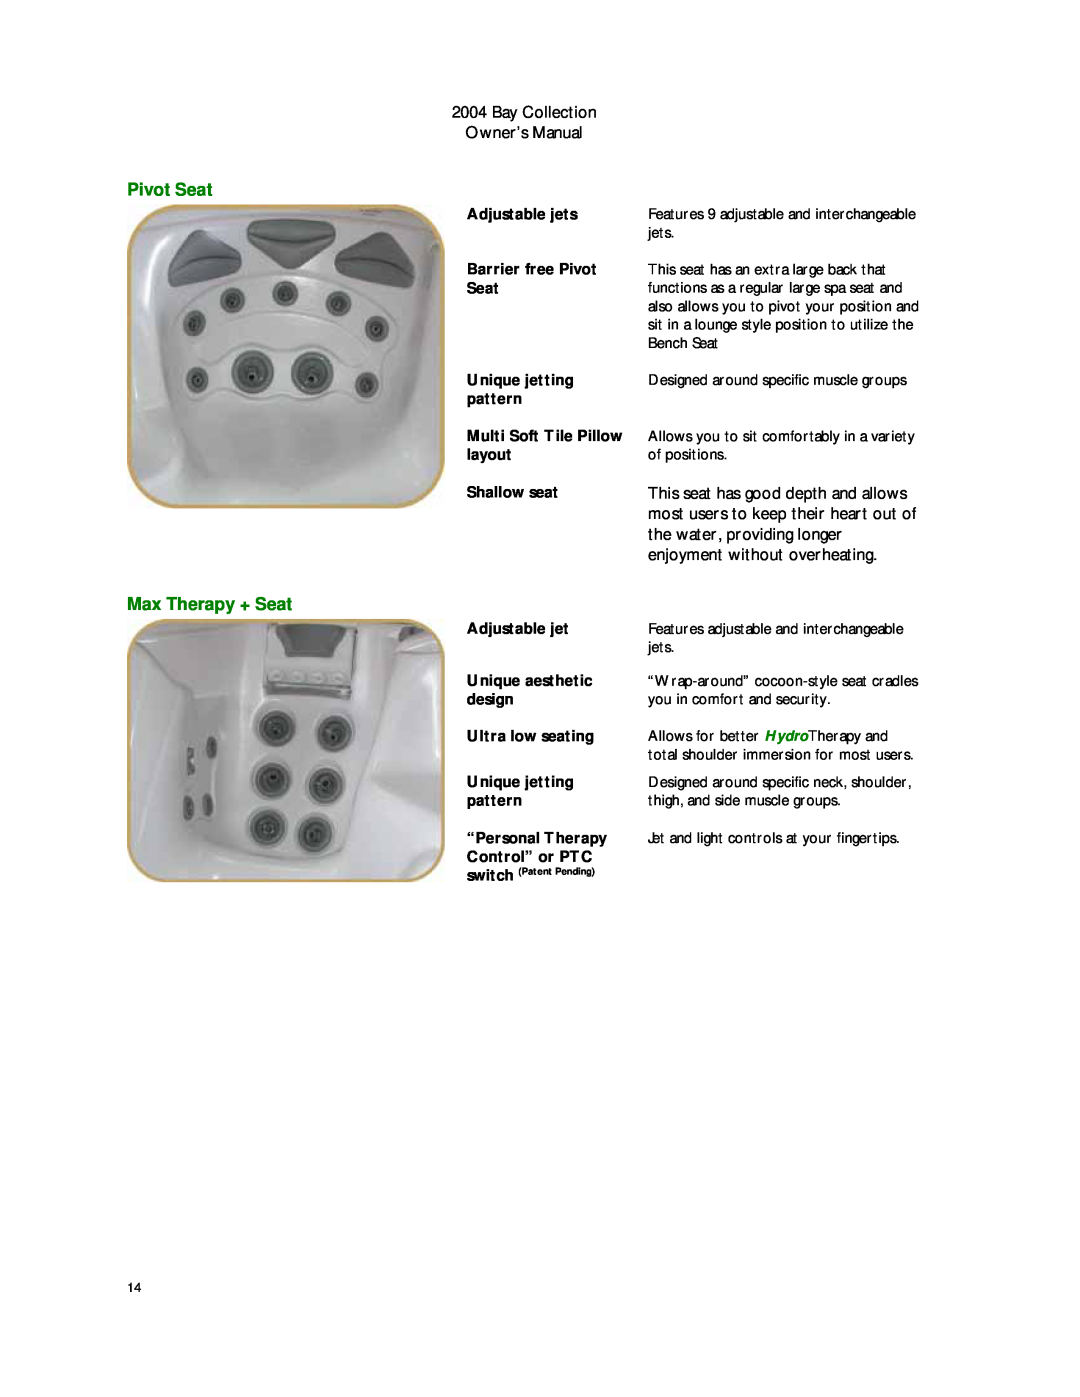 Dimension One Spas Bay Collection manual the water, providing longer, enjoyment without overheating, Max Therapy + Seat 